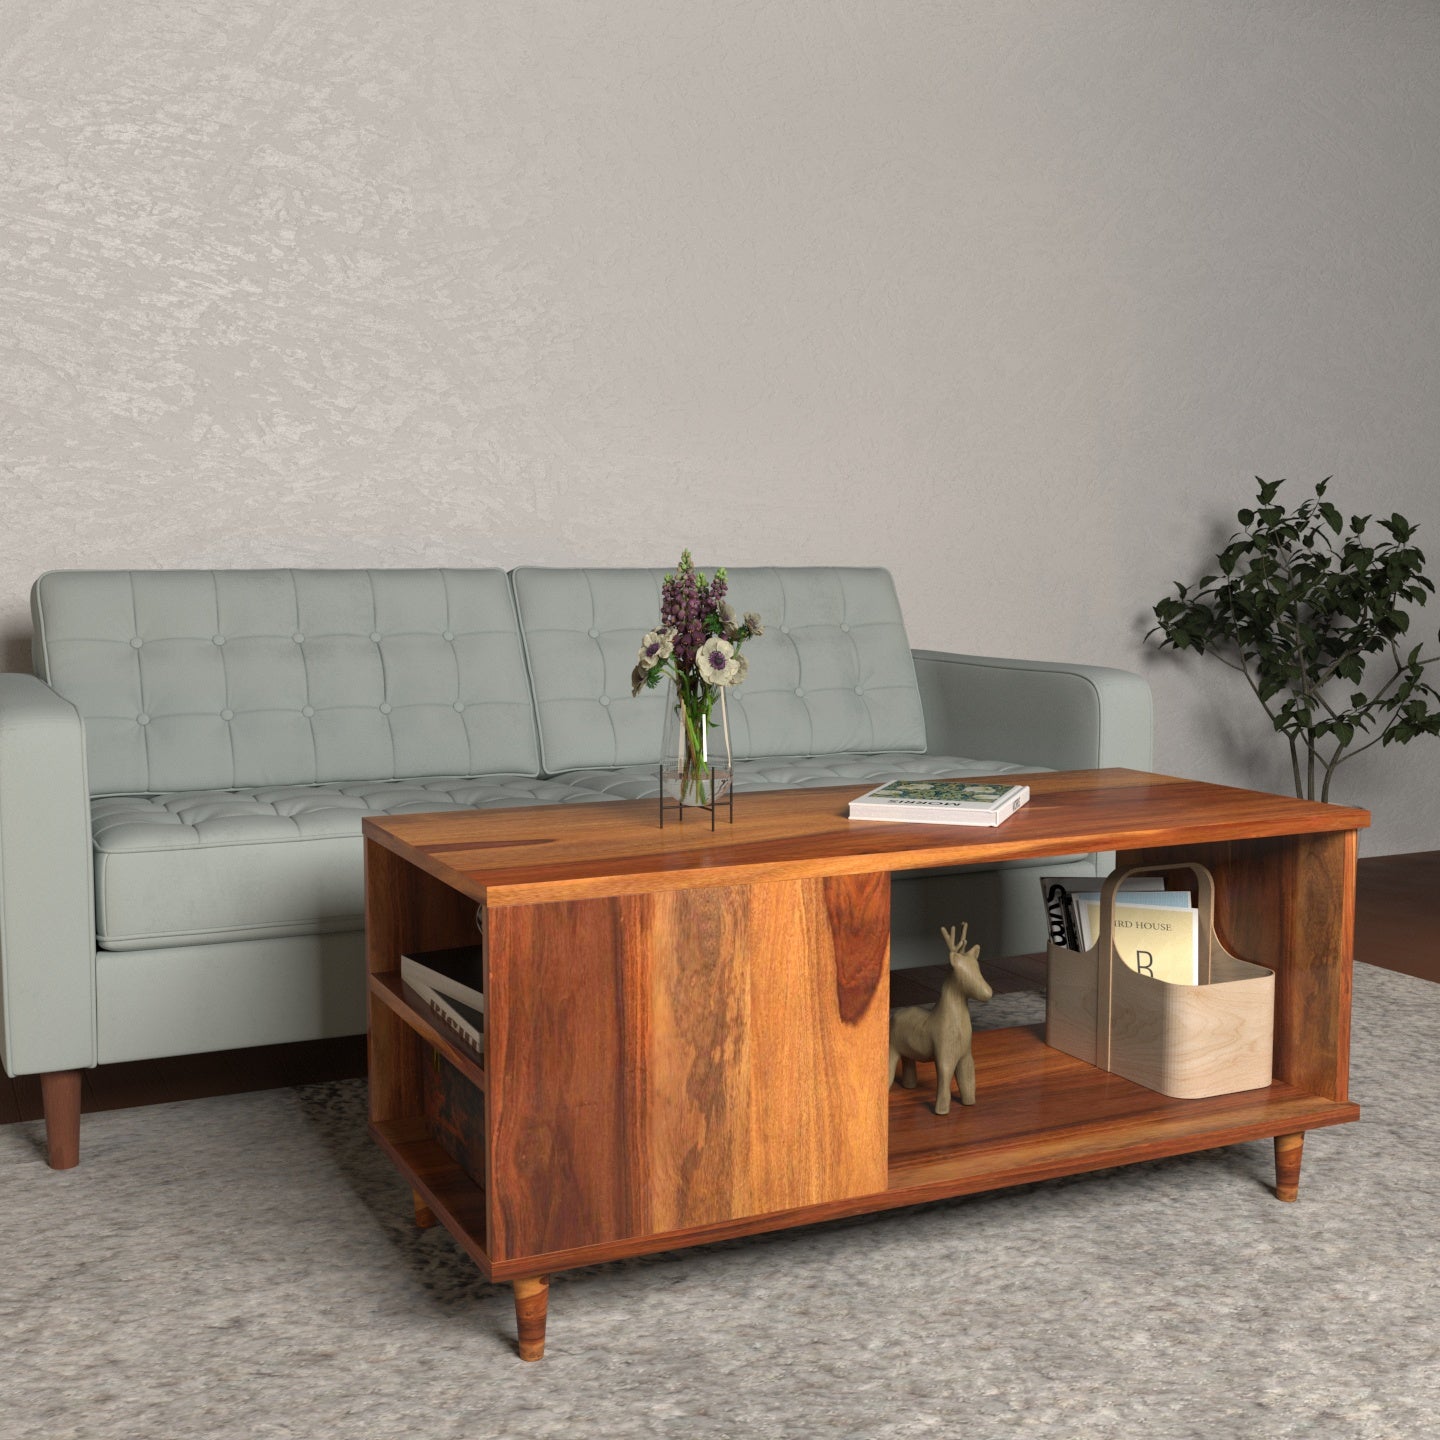 Traditional Time Simple Storage Wooden Coffee Table Coffee Table